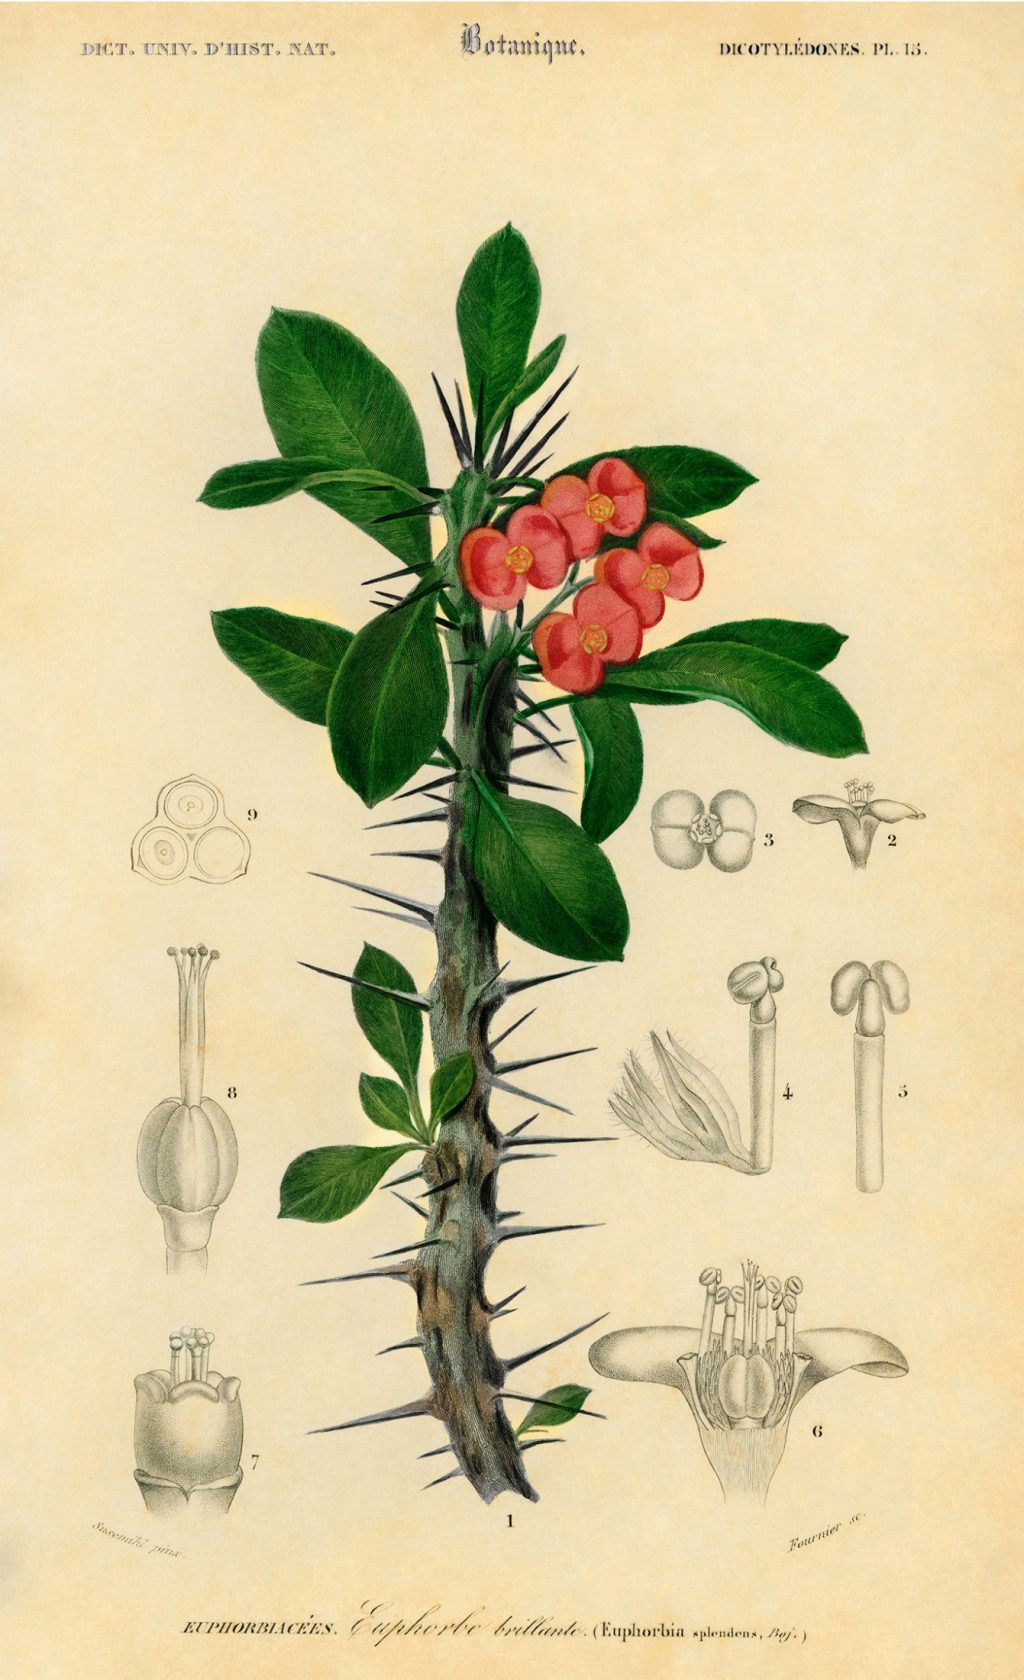 Vintage illustration of a crown of thorns plant in the spurge family, with an impressive array of thorns surrounding its stem